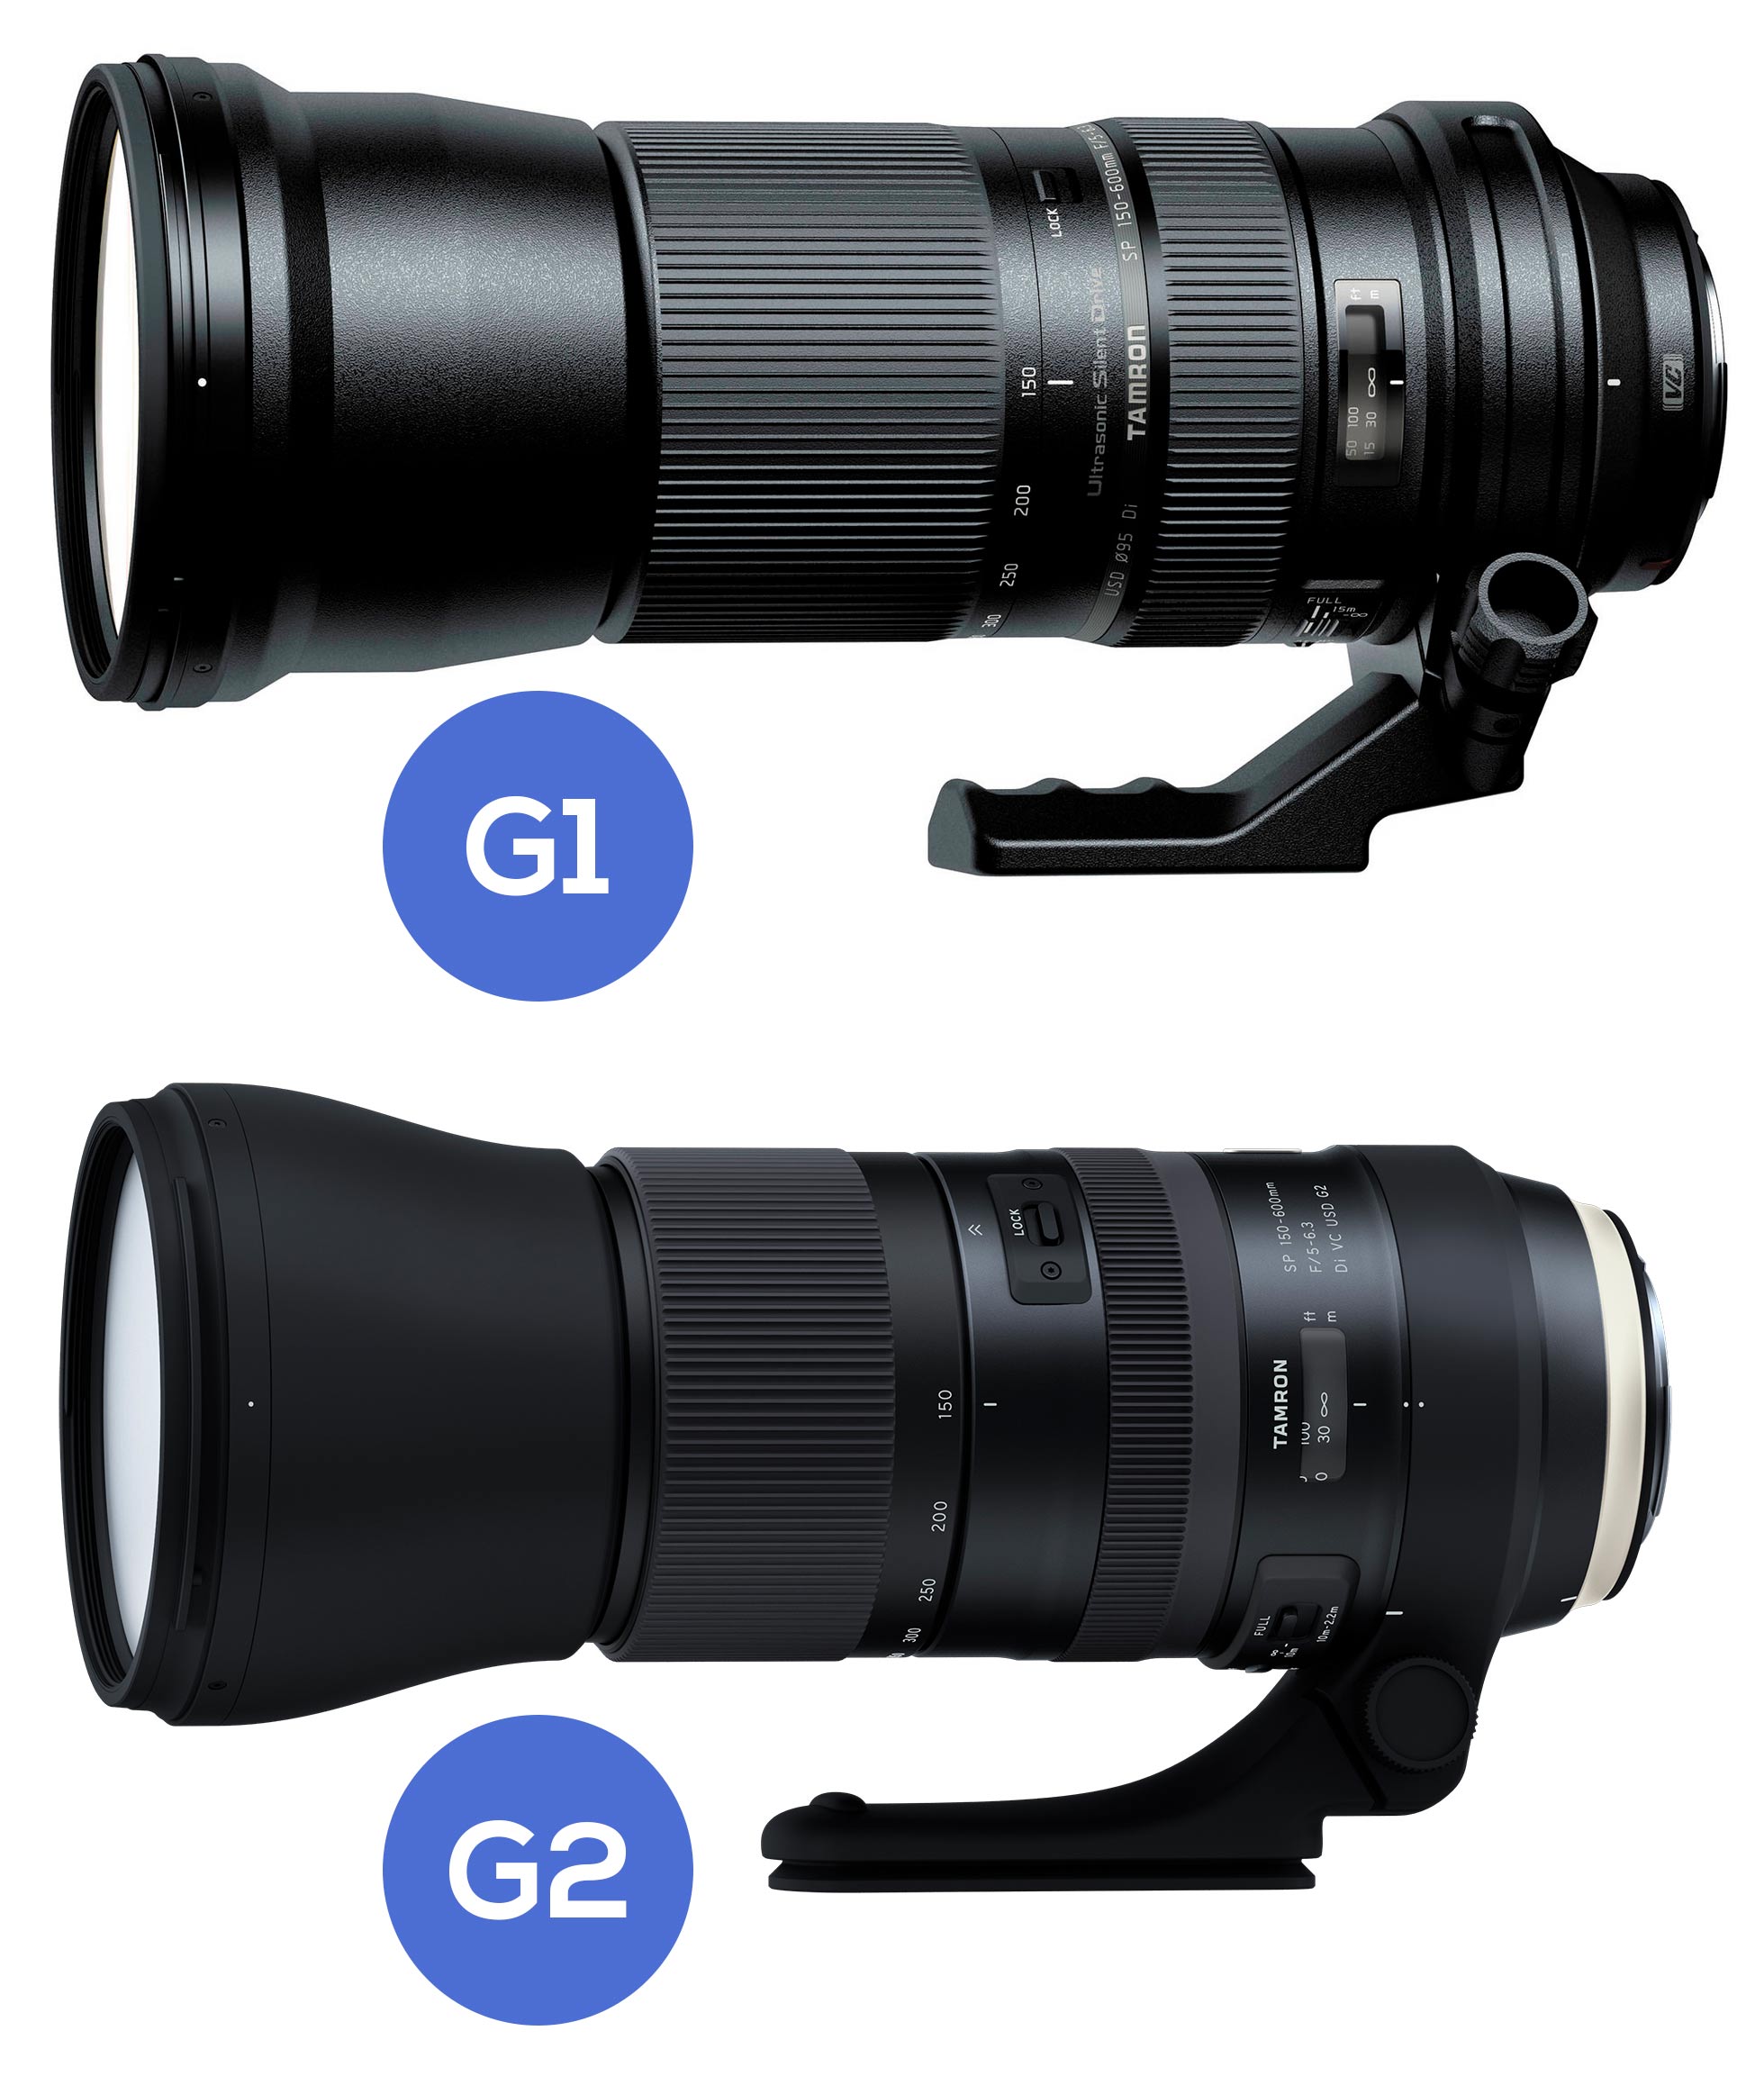 Sp 150 600mm f 5 63 di vc usd sony Tamron Announces Updated Sp 150 600mm F 5 6 3 Di Vc Usd G2 Light And Matter